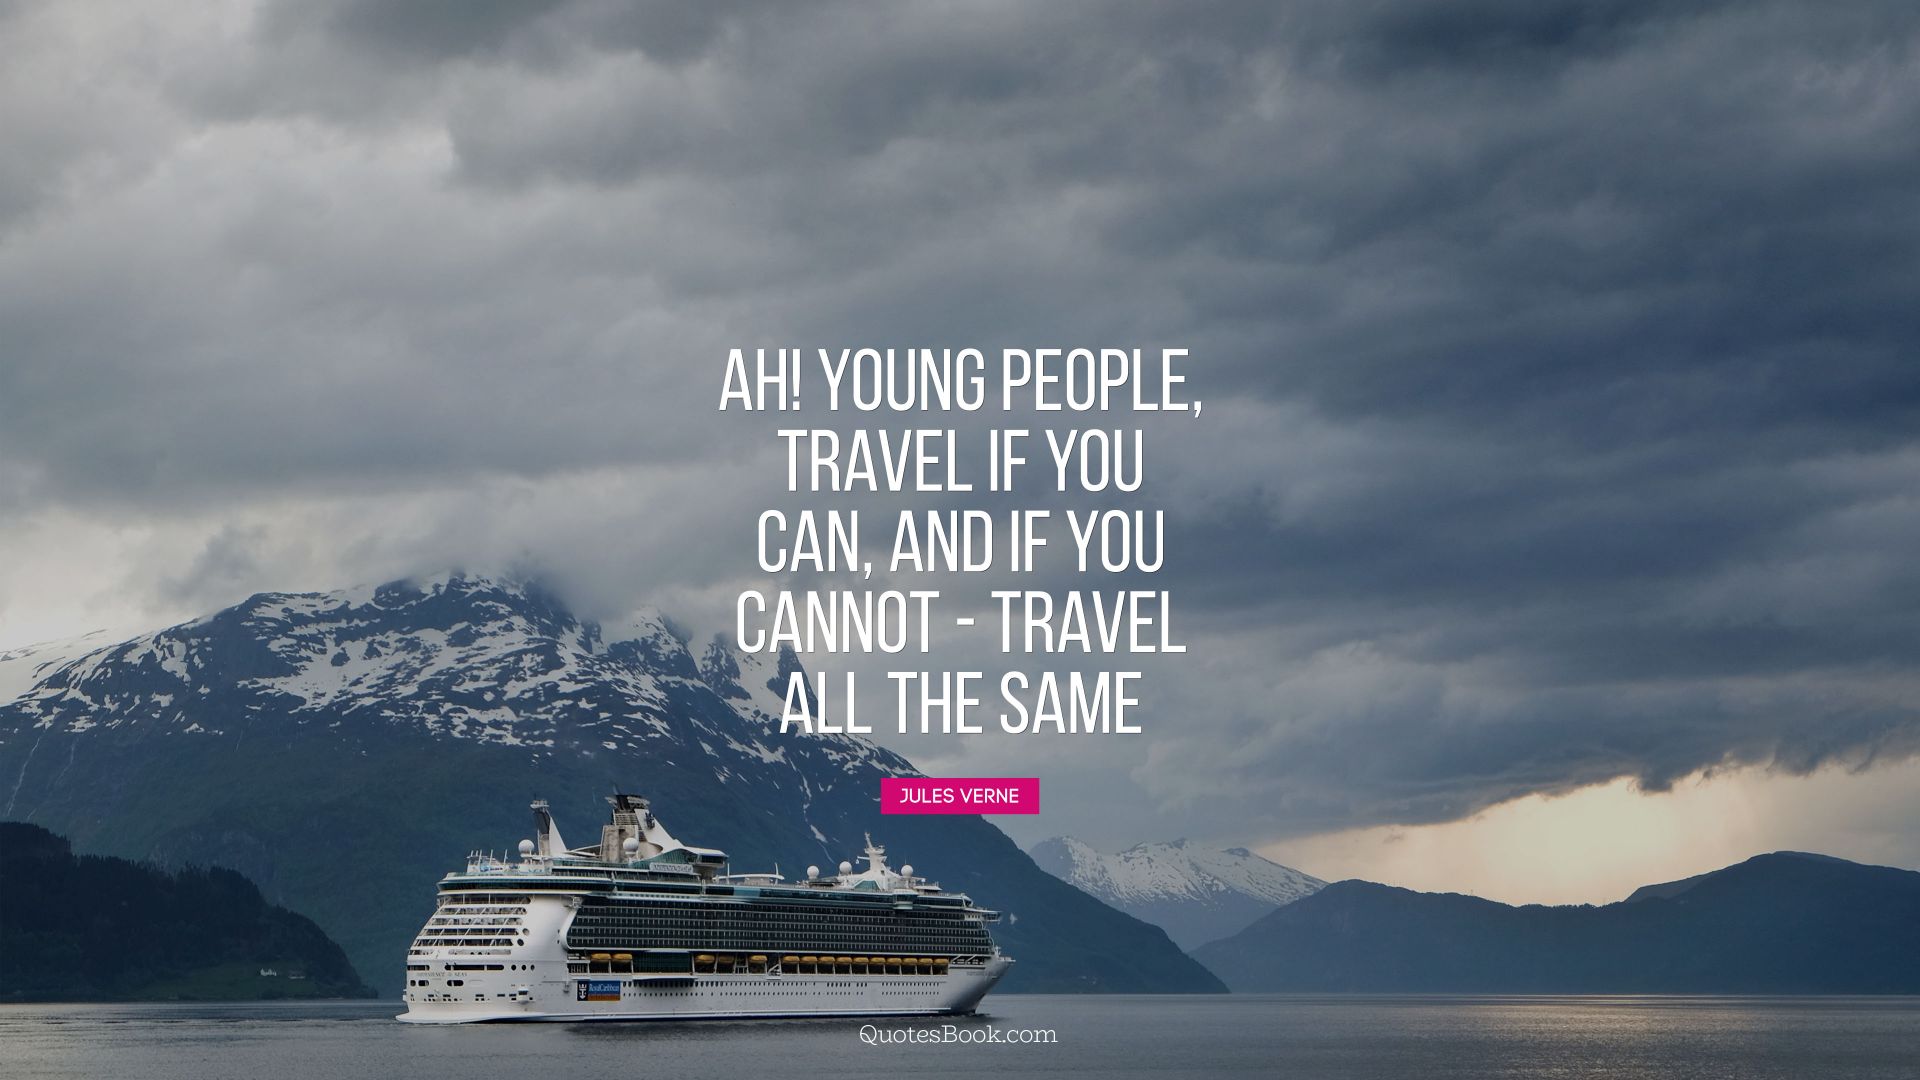 Ah! Young people, travel if you can, and if you cannot - travel all the same. - Quote by Jules Verne